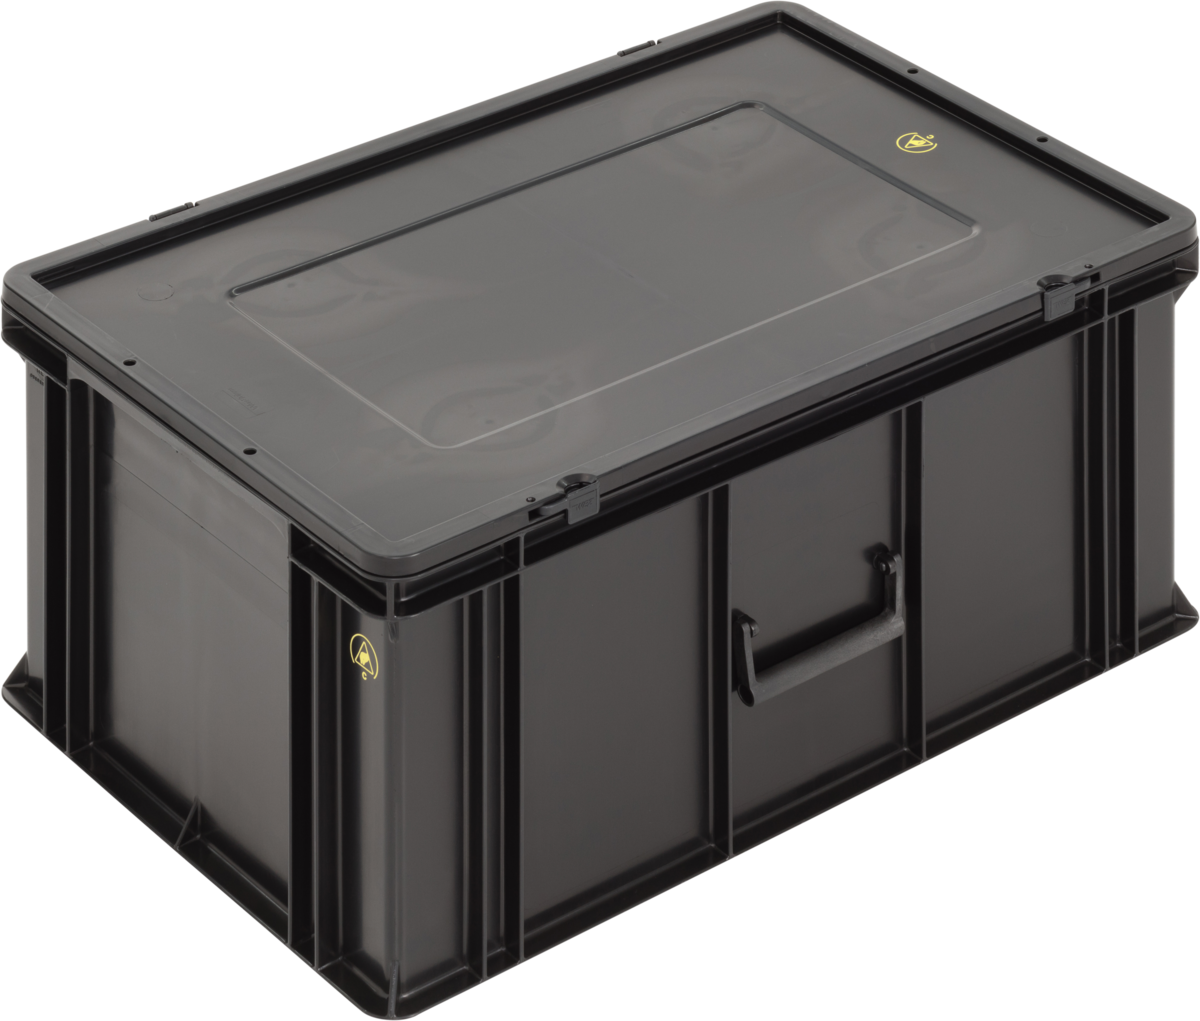 Anti-Static-ESD-Antistatic-ESD-Safe-SGL-Norm-Carrying-Cases-Flat-Base-007-Ref.-6426.397.992_1004511_600x400x288_01